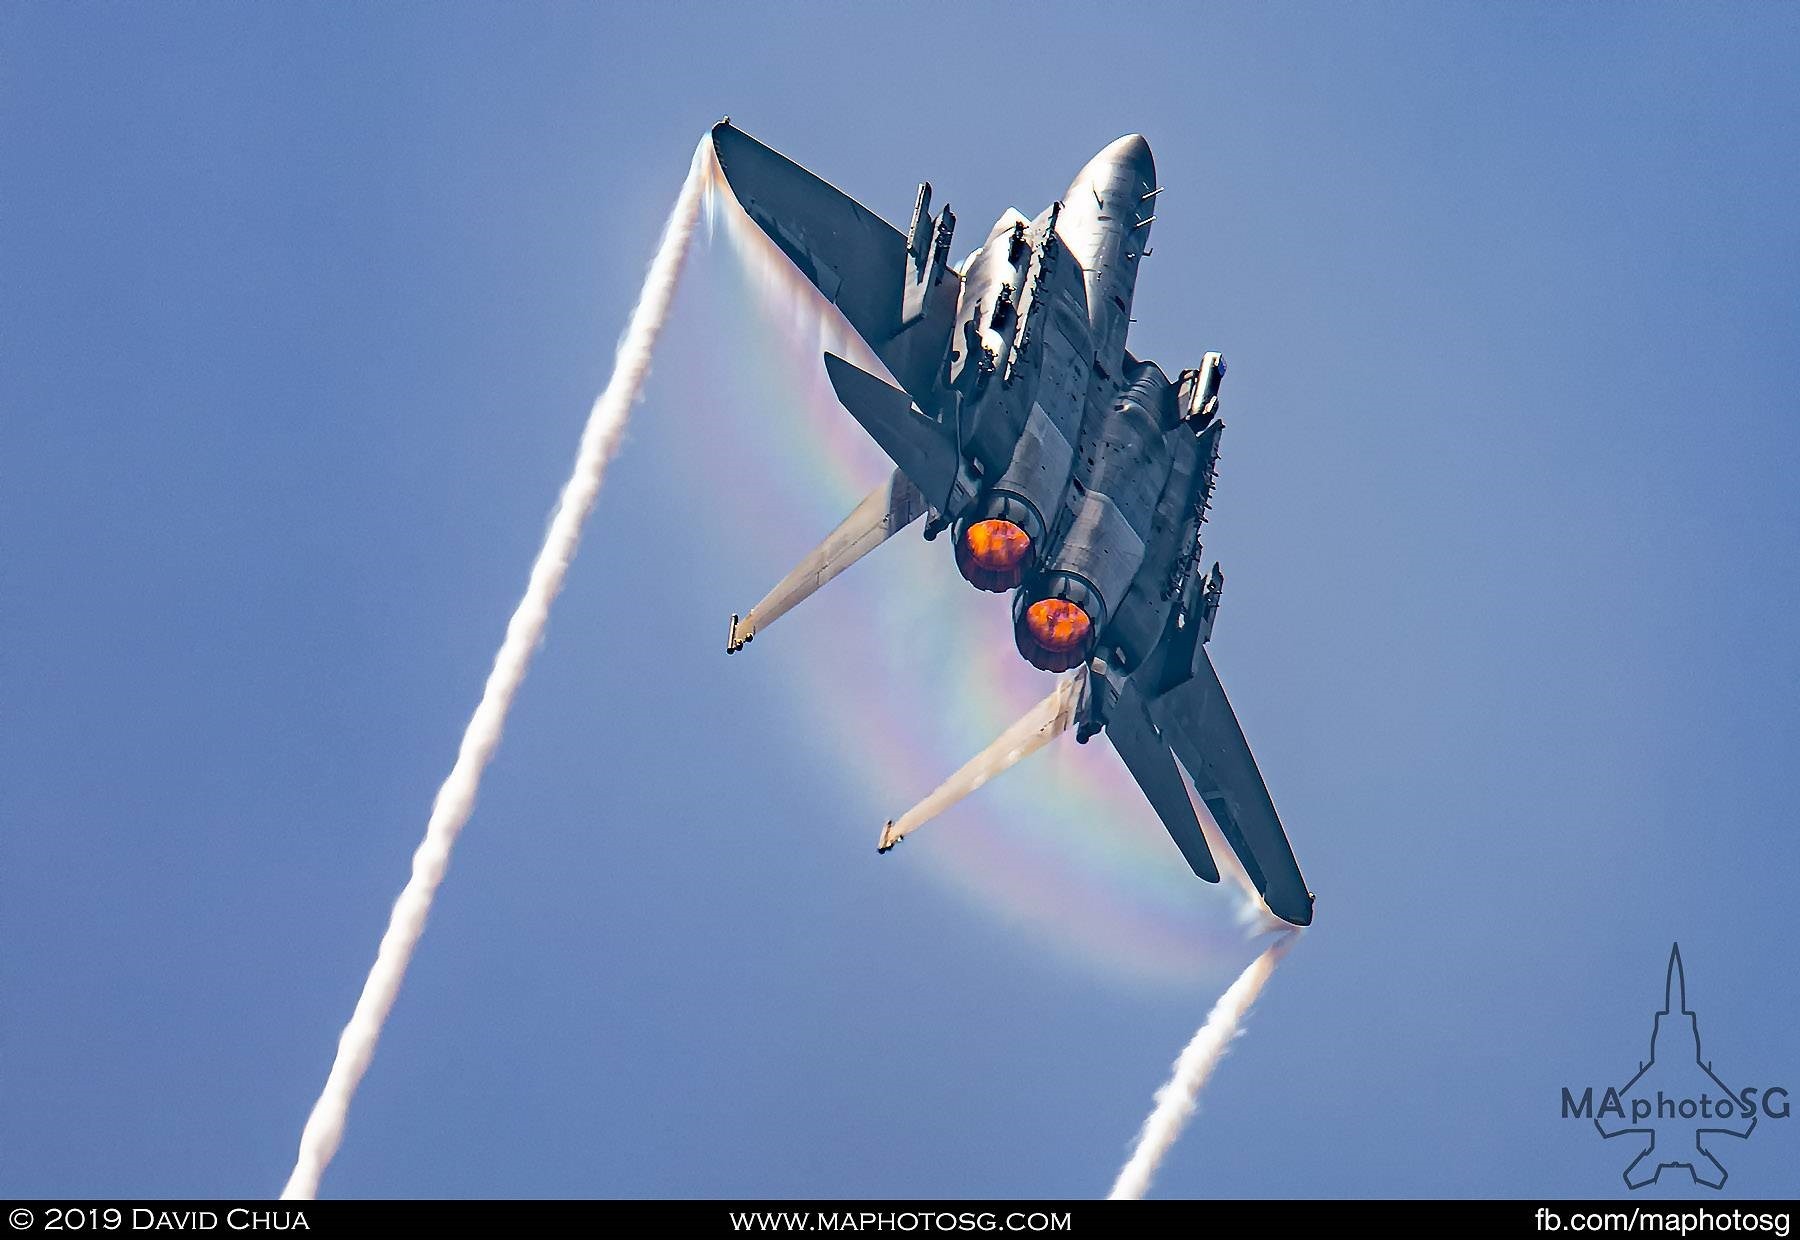 RSAF F-15SG performs the vertical climb after a High-G turn